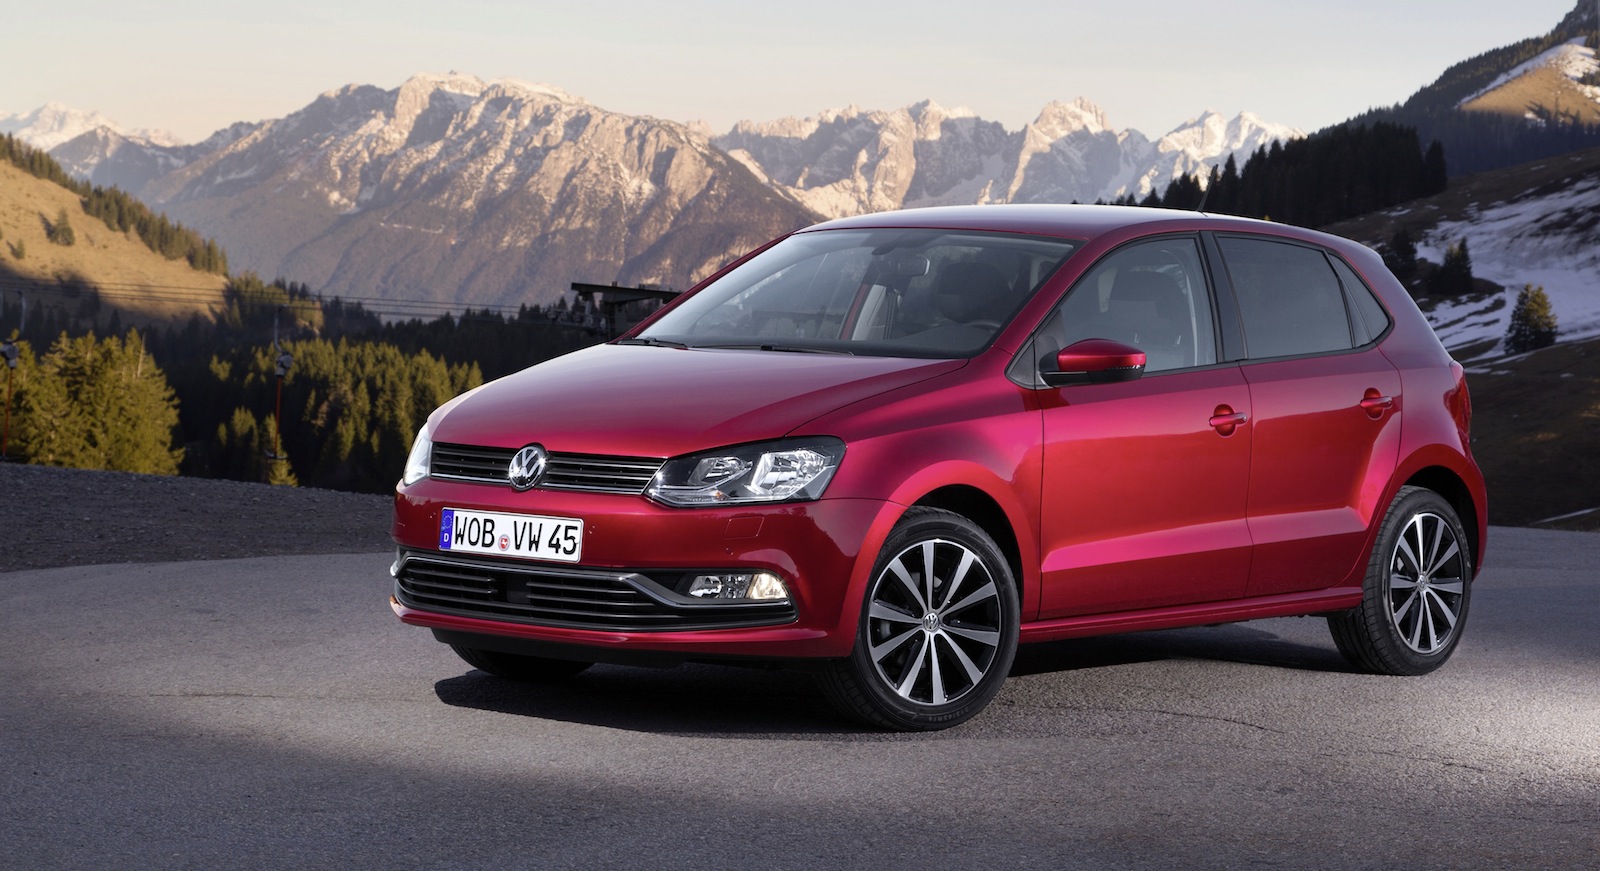 2014 Volkswagen Polo The Quick Guide Photos (1 of 11)